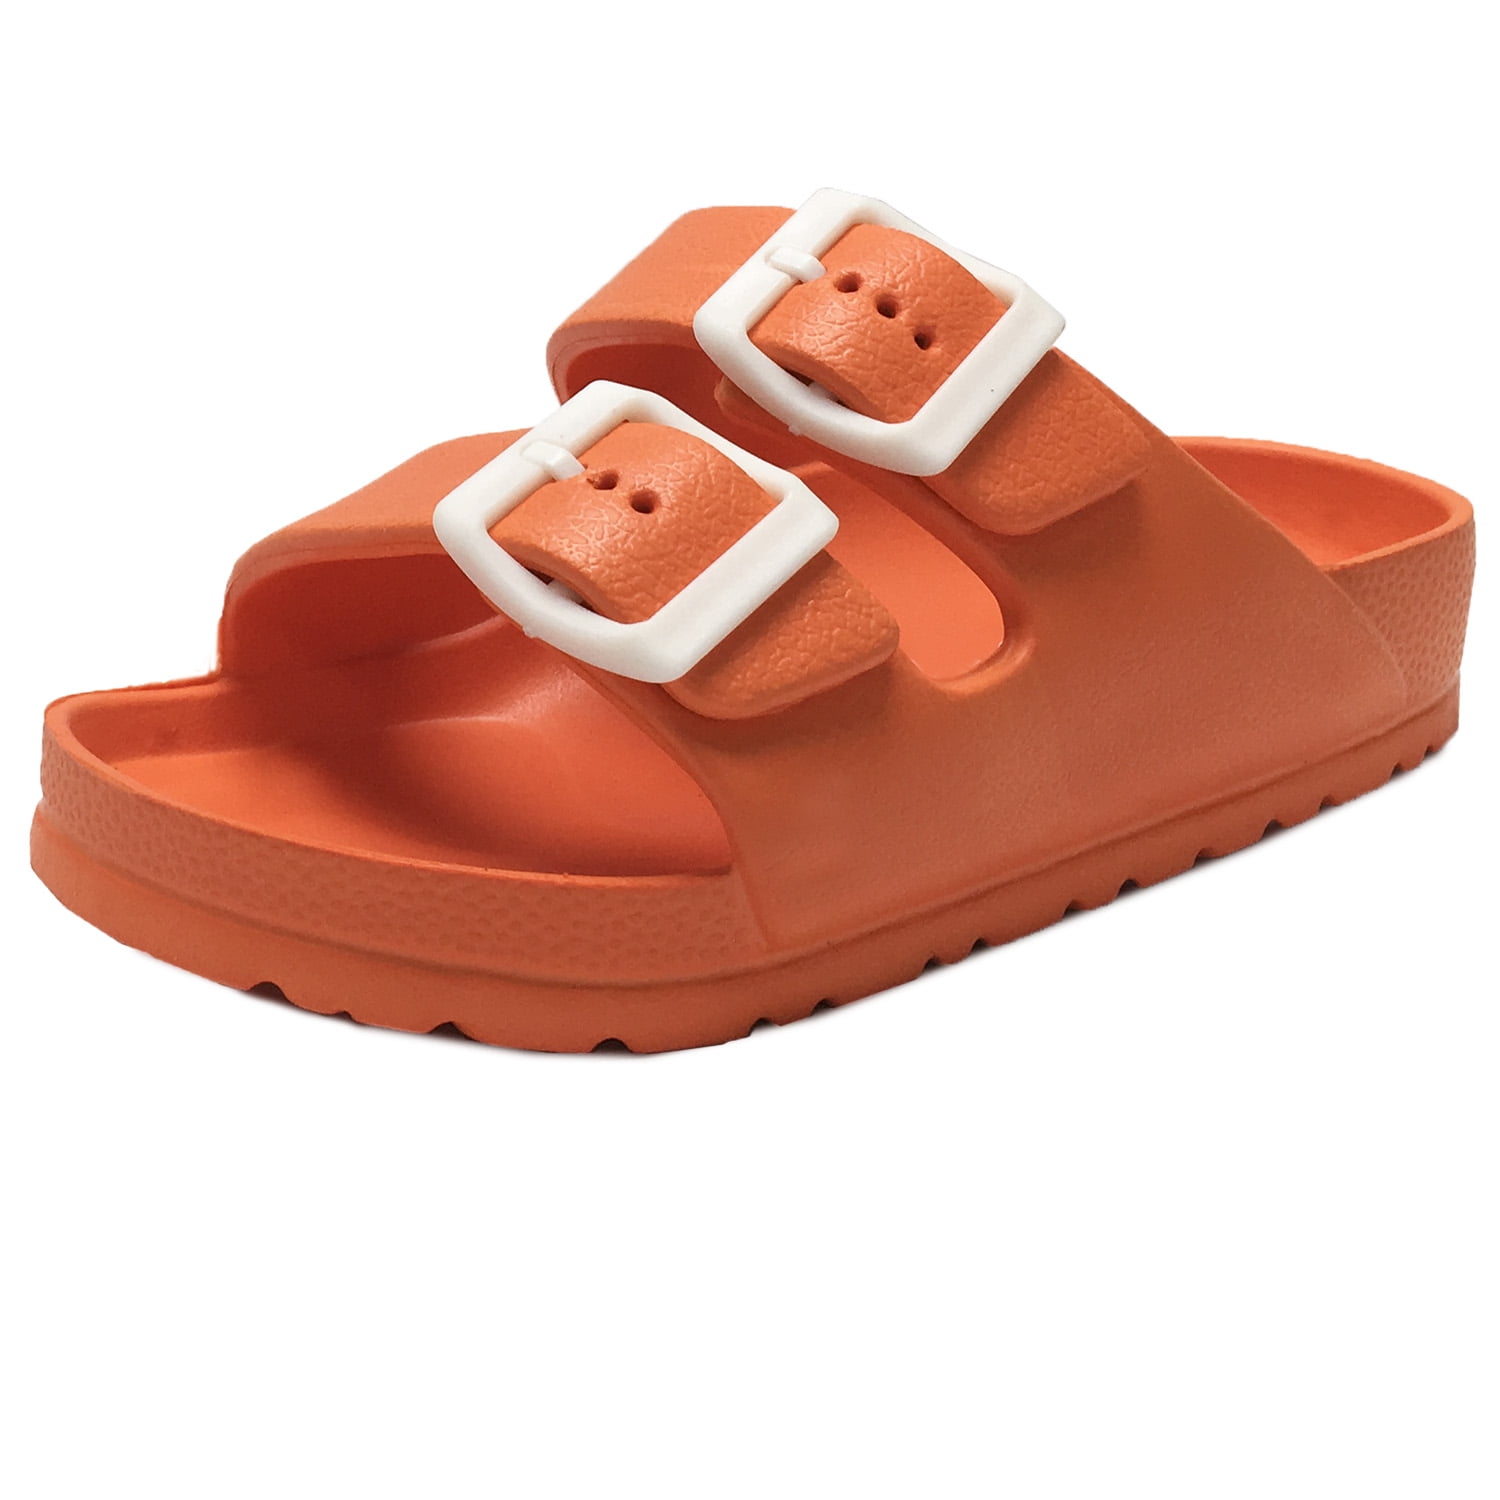 double buckle sandals for toddlers